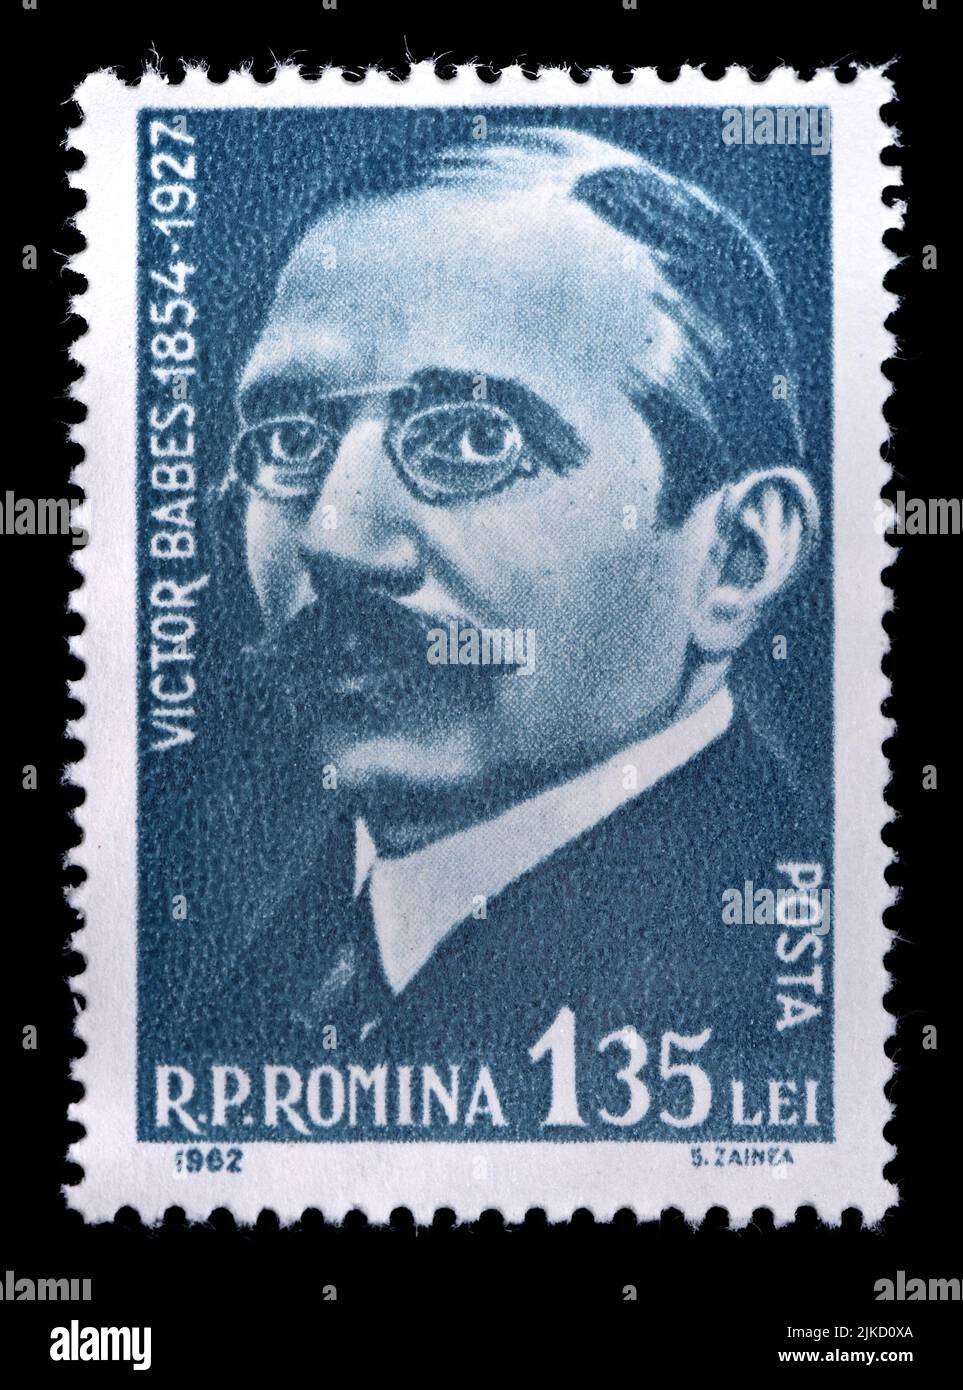 Romanian postage stamp (1962) : Victor Babes (1854-1926) Romanian physician and bacteriologist, Stock Photo